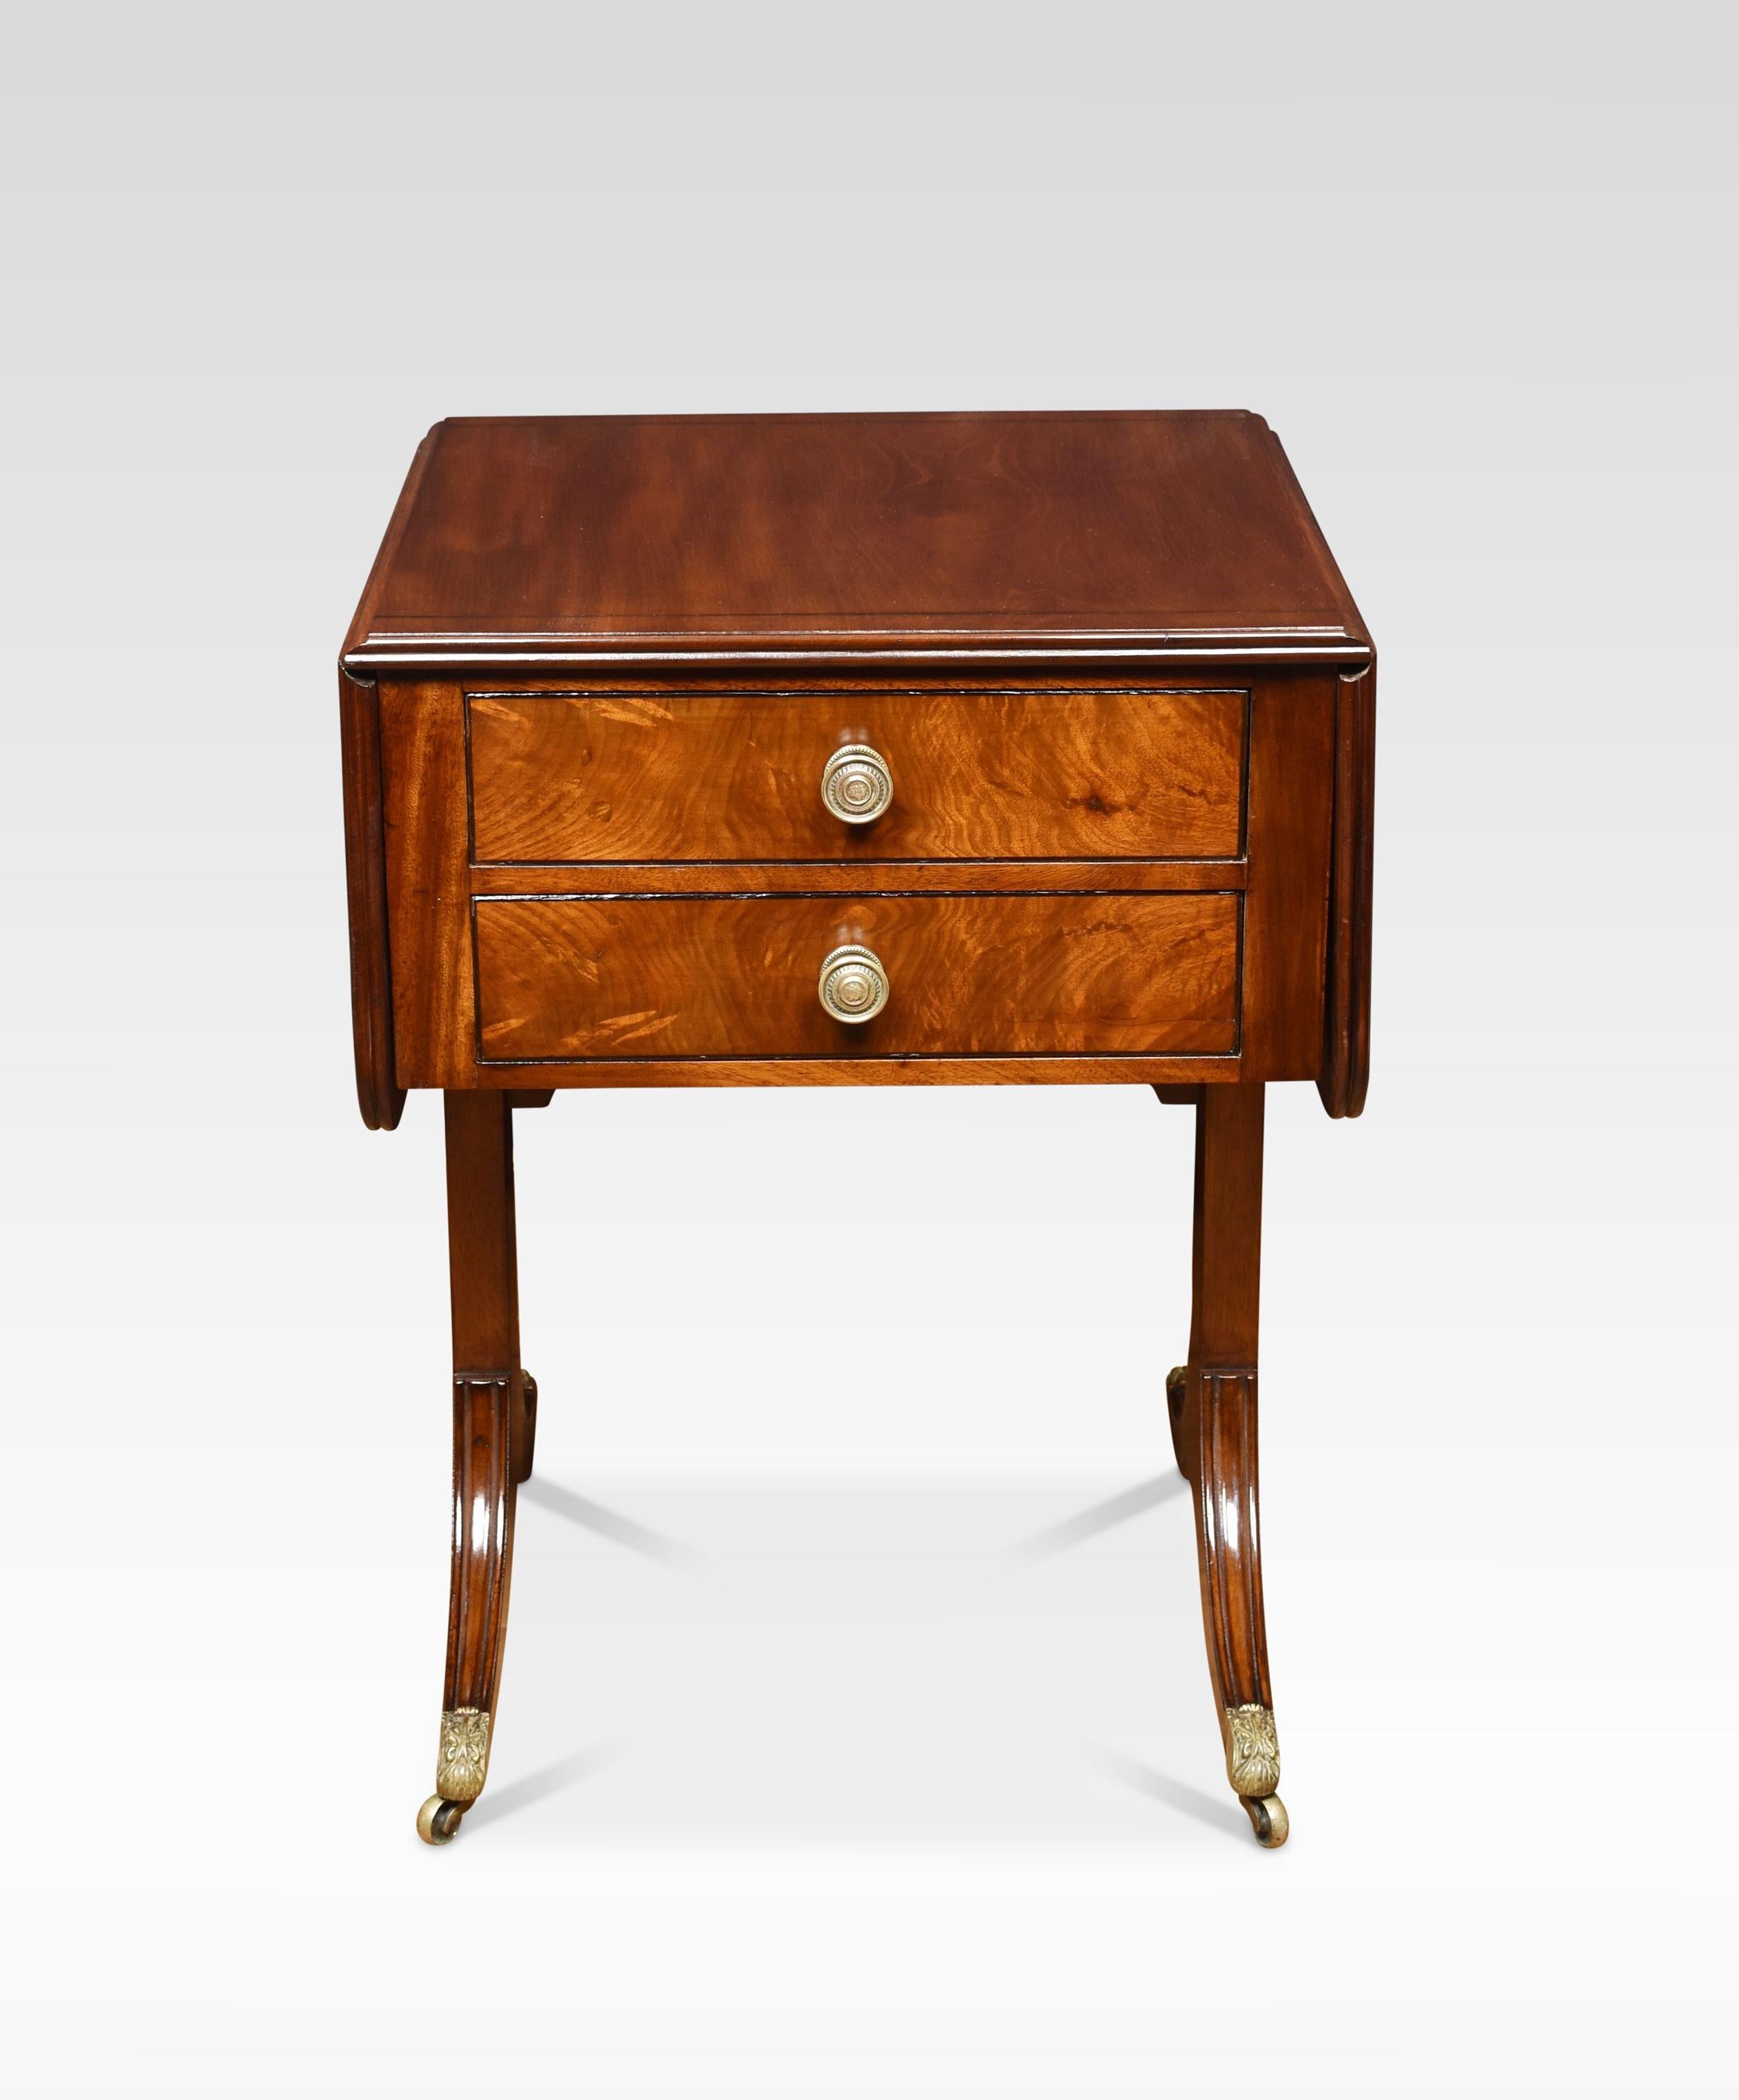 Regency mahogany lamp table of small proportions, the rounded rectangular string inlaid top above two frieze drawers with brass handles. All raised up on saber legs with brass caps and castors.
Dimensions
Height 29 inches
Width 21.5 inches when